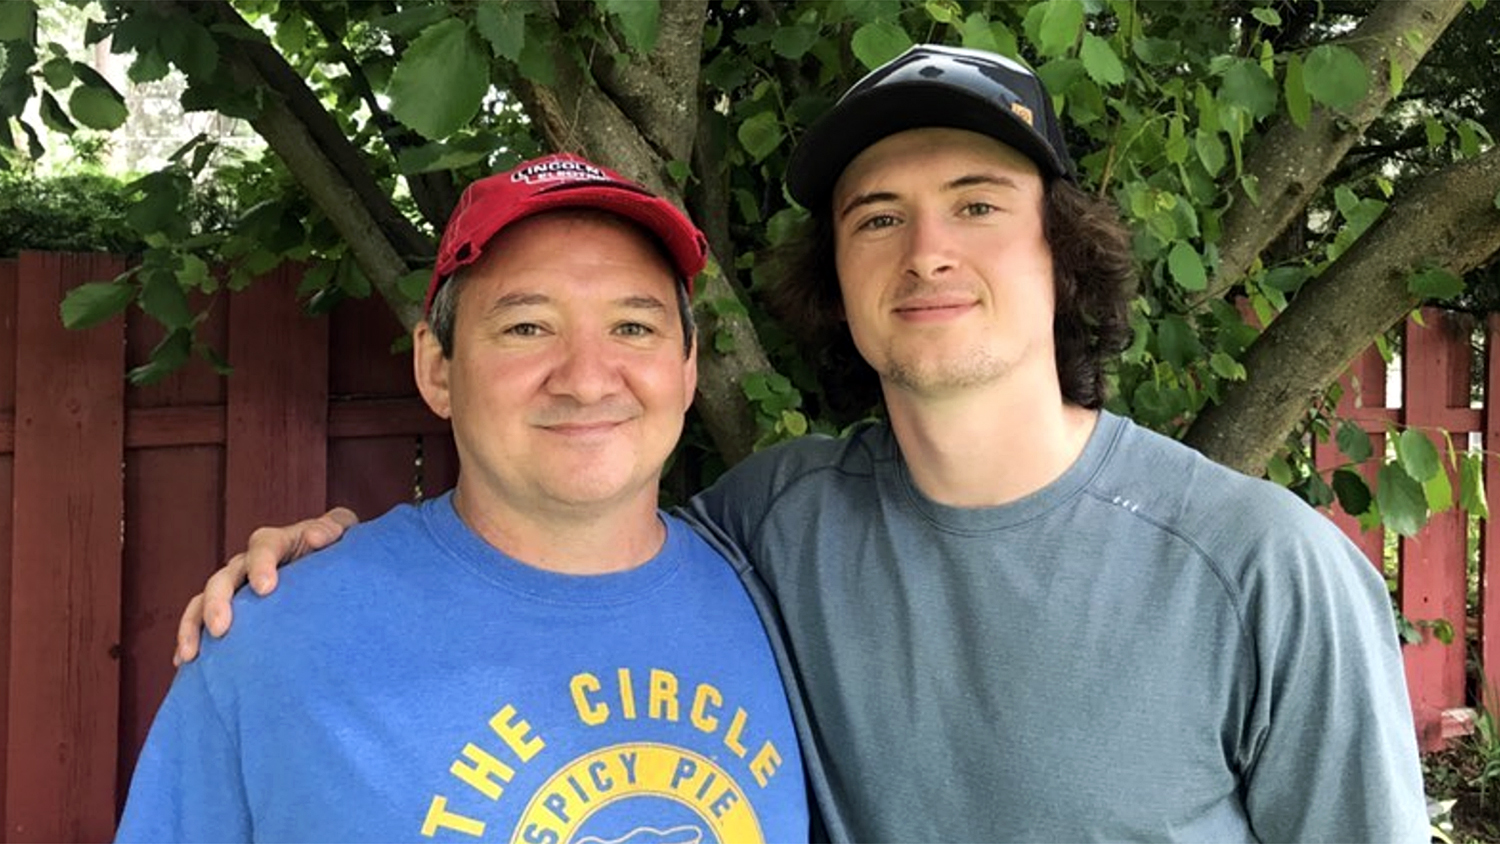 Edmonton Oilers on X: One last shout-out to the dads courtesy Russ & Kailer  Yamamoto! 🧡💙 #FathersDay